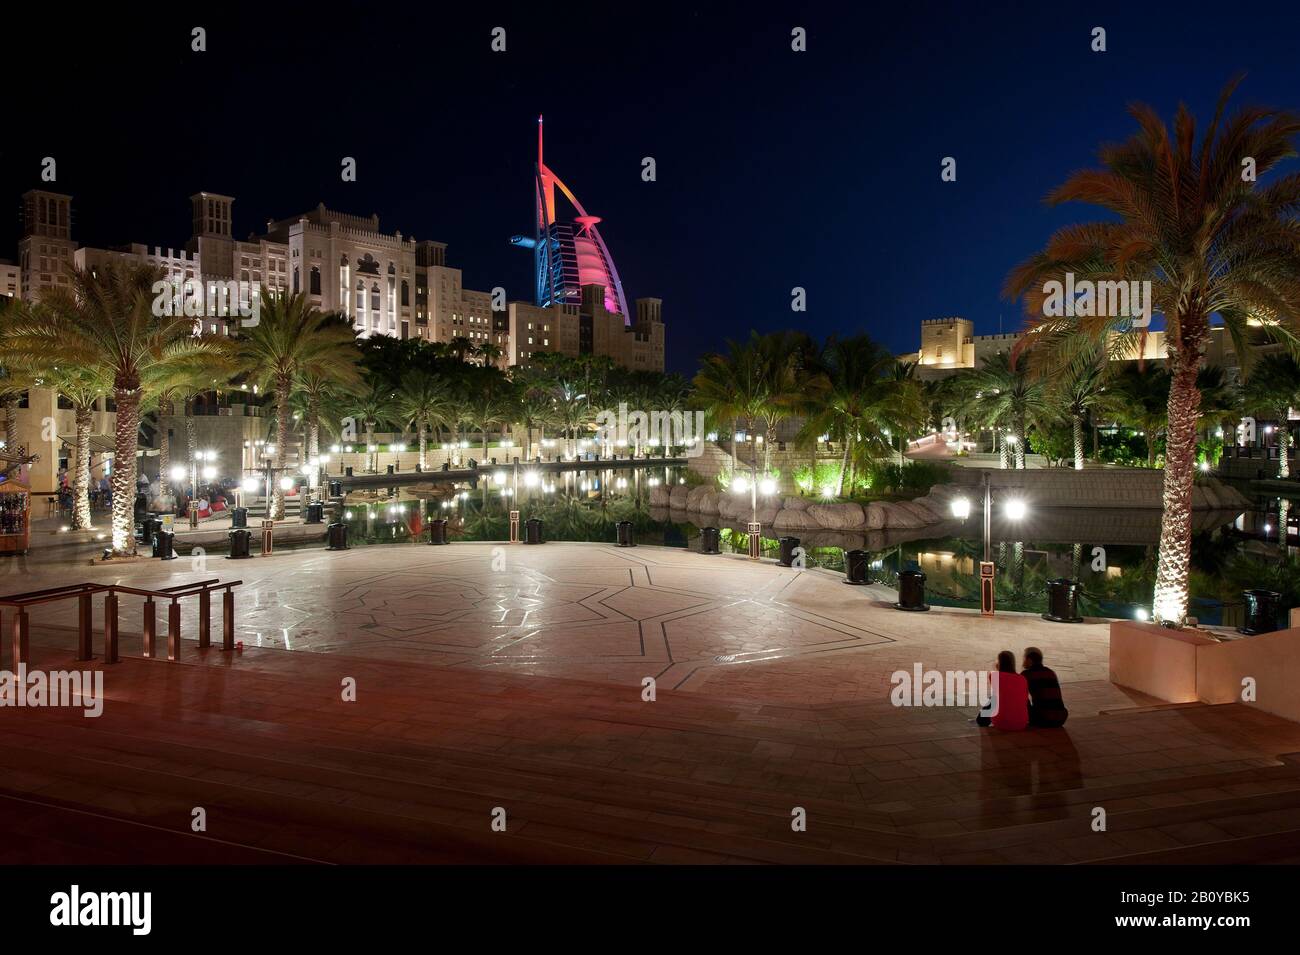 Amphitheater in the Madinat Jumeirah at night with a view of Burj Al Arab, New Dubai, United Arab Emirates, Stock Photo